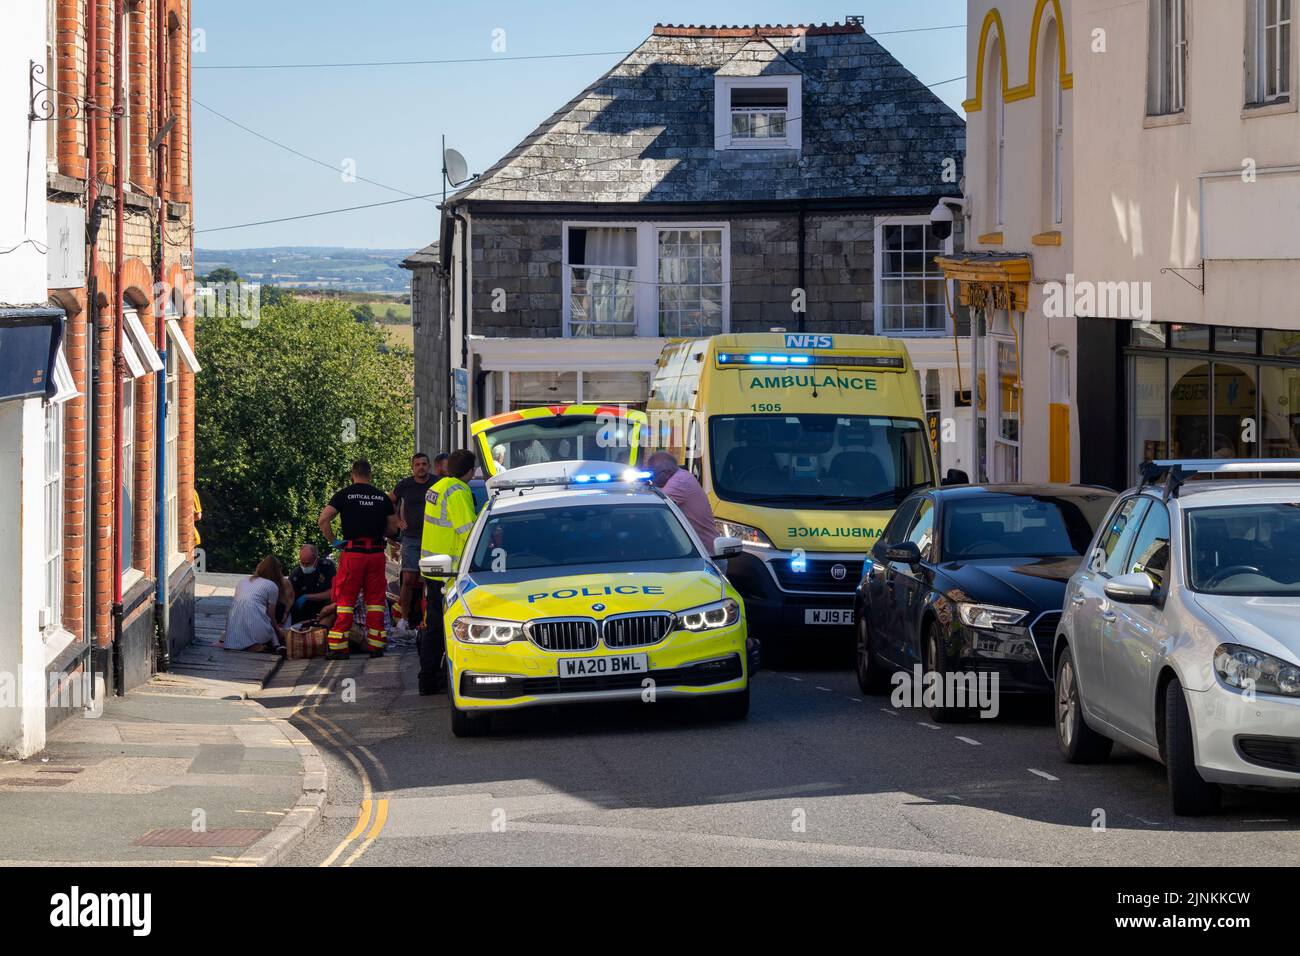 A pedestrian stepped into the road and was knocked over by a car, (casualty conscious & talking). The police, ambulance and air ambulance responded. Stock Photo